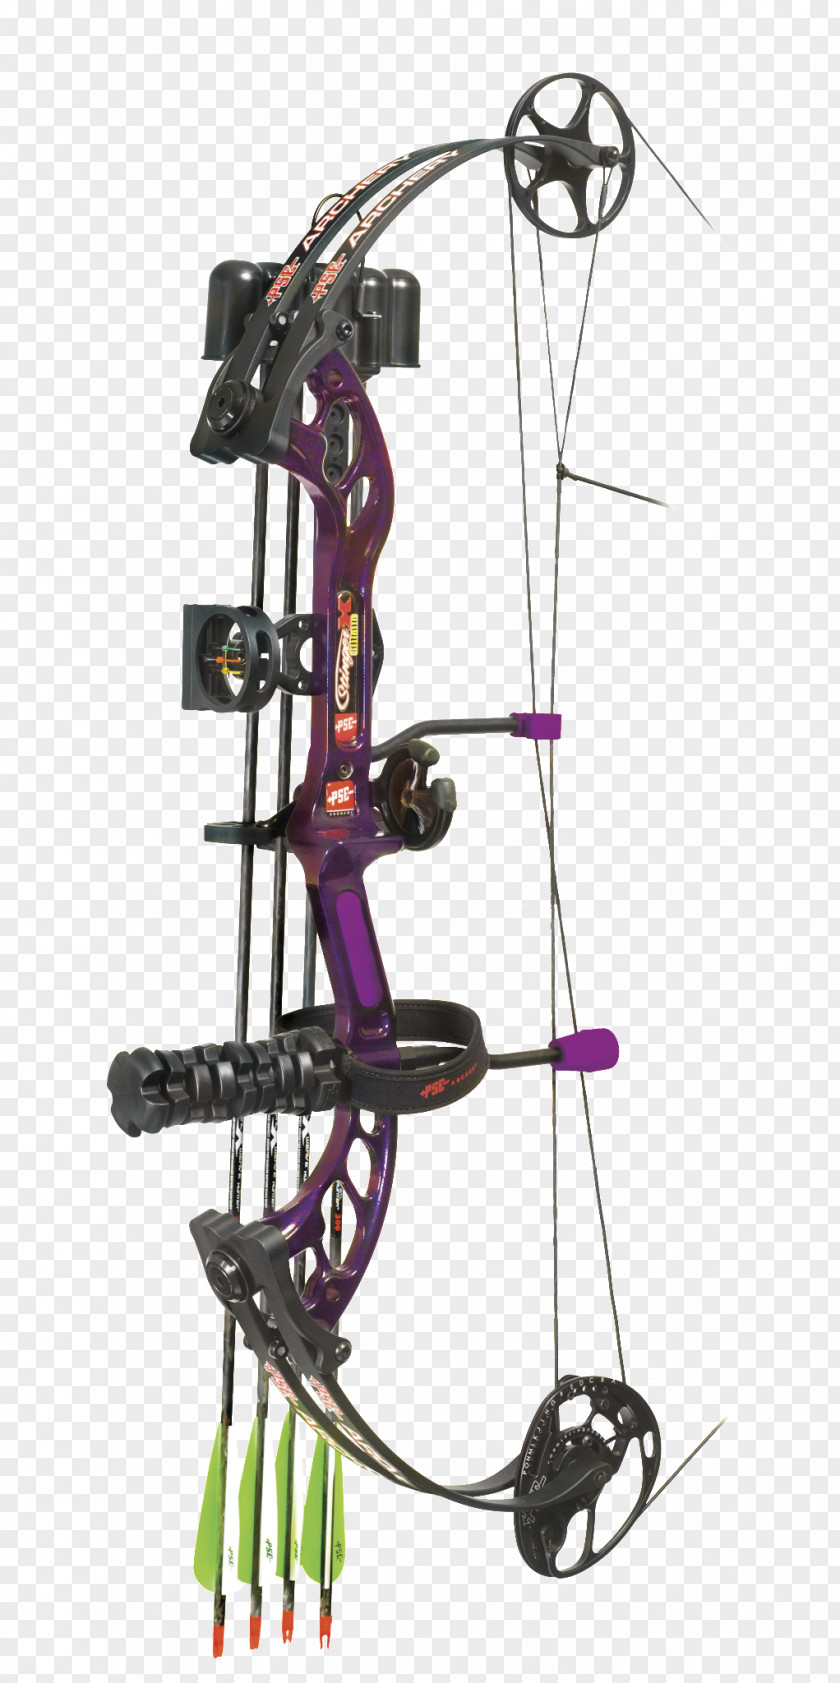 Archery Puppies Compound Bows PSE Bow And Arrow Hunting PNG